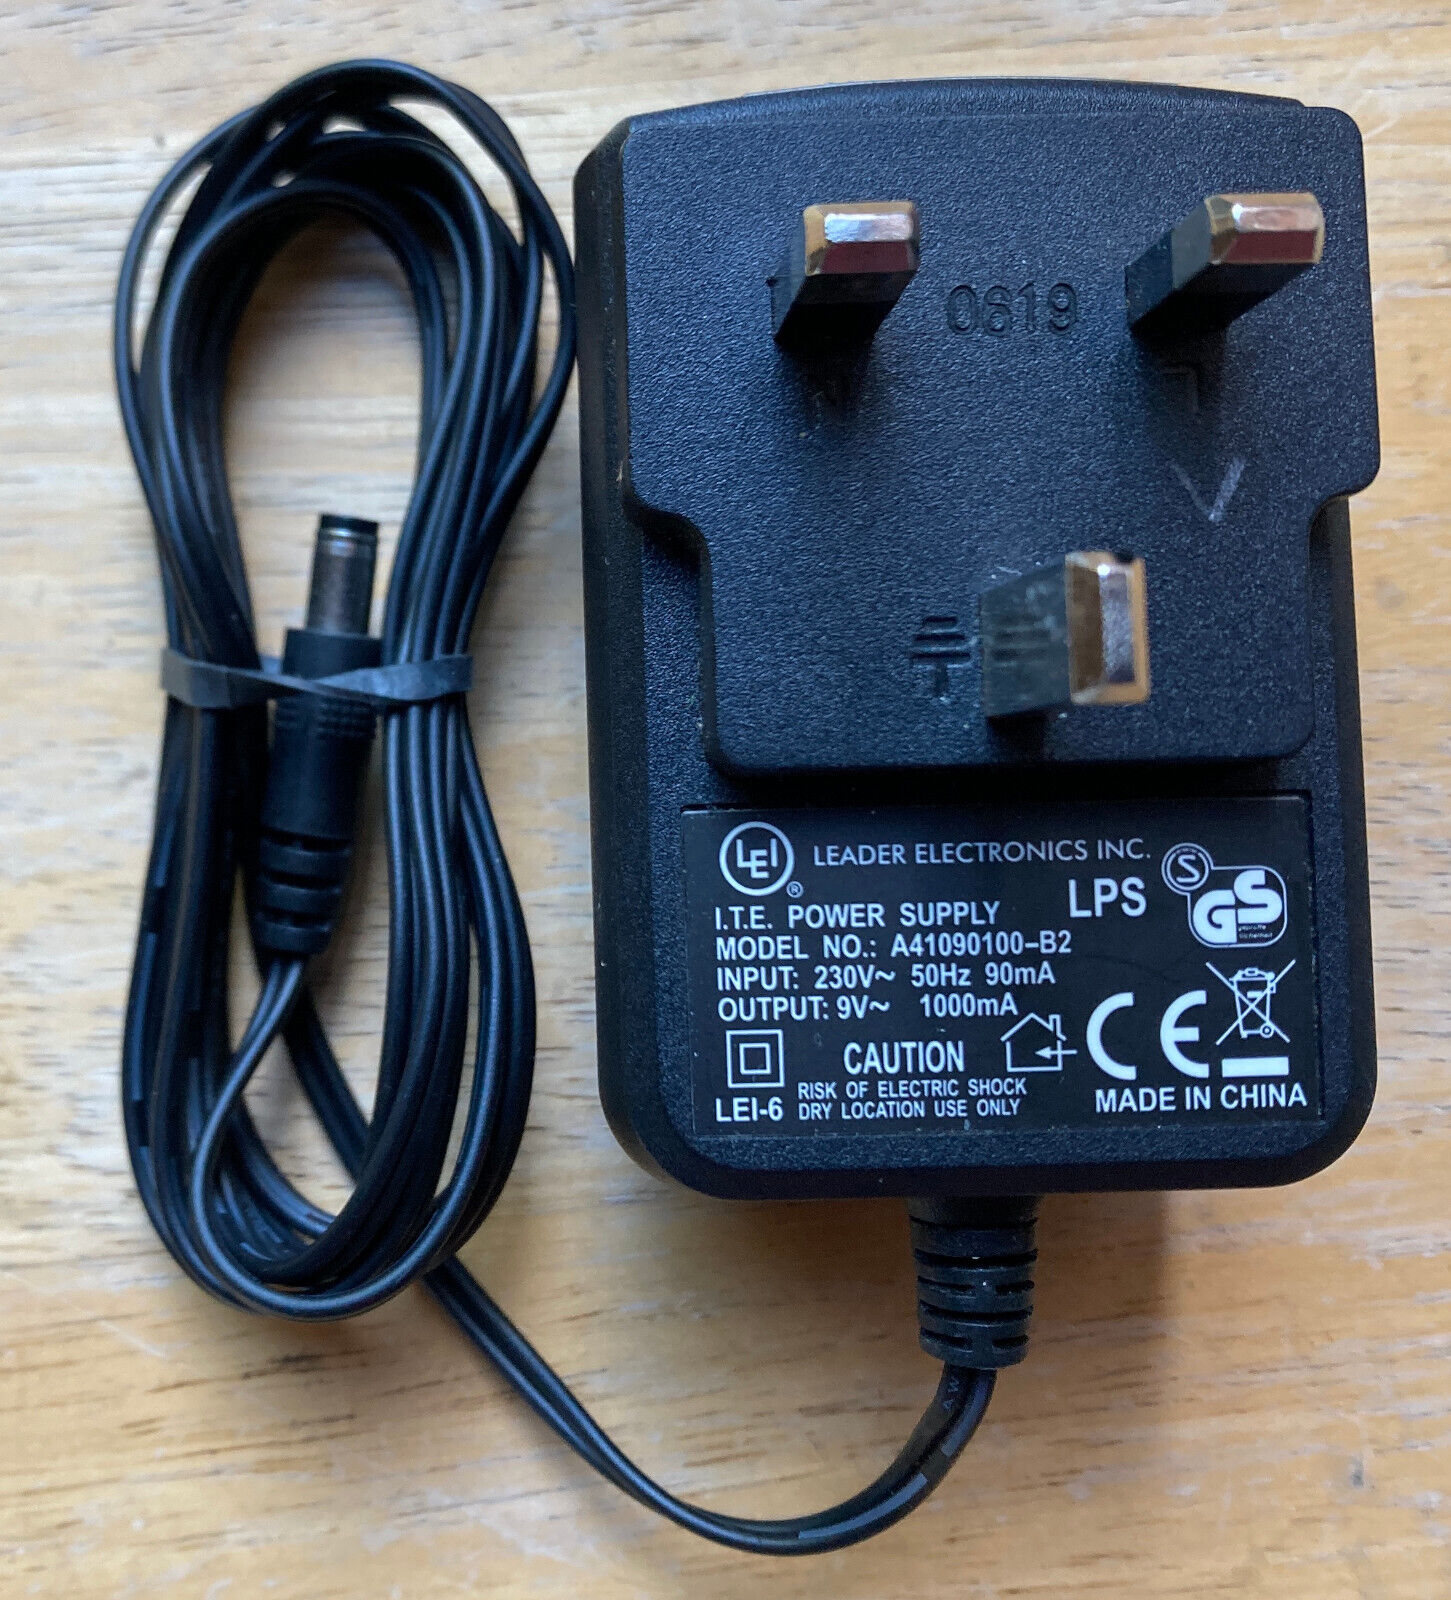 FMR Audio RNC1773 RNLA7239 9V 1A Replacement AC/AC AC-AC Power Supply Adapter Brand: GlobTek Type: AC Power Supply O